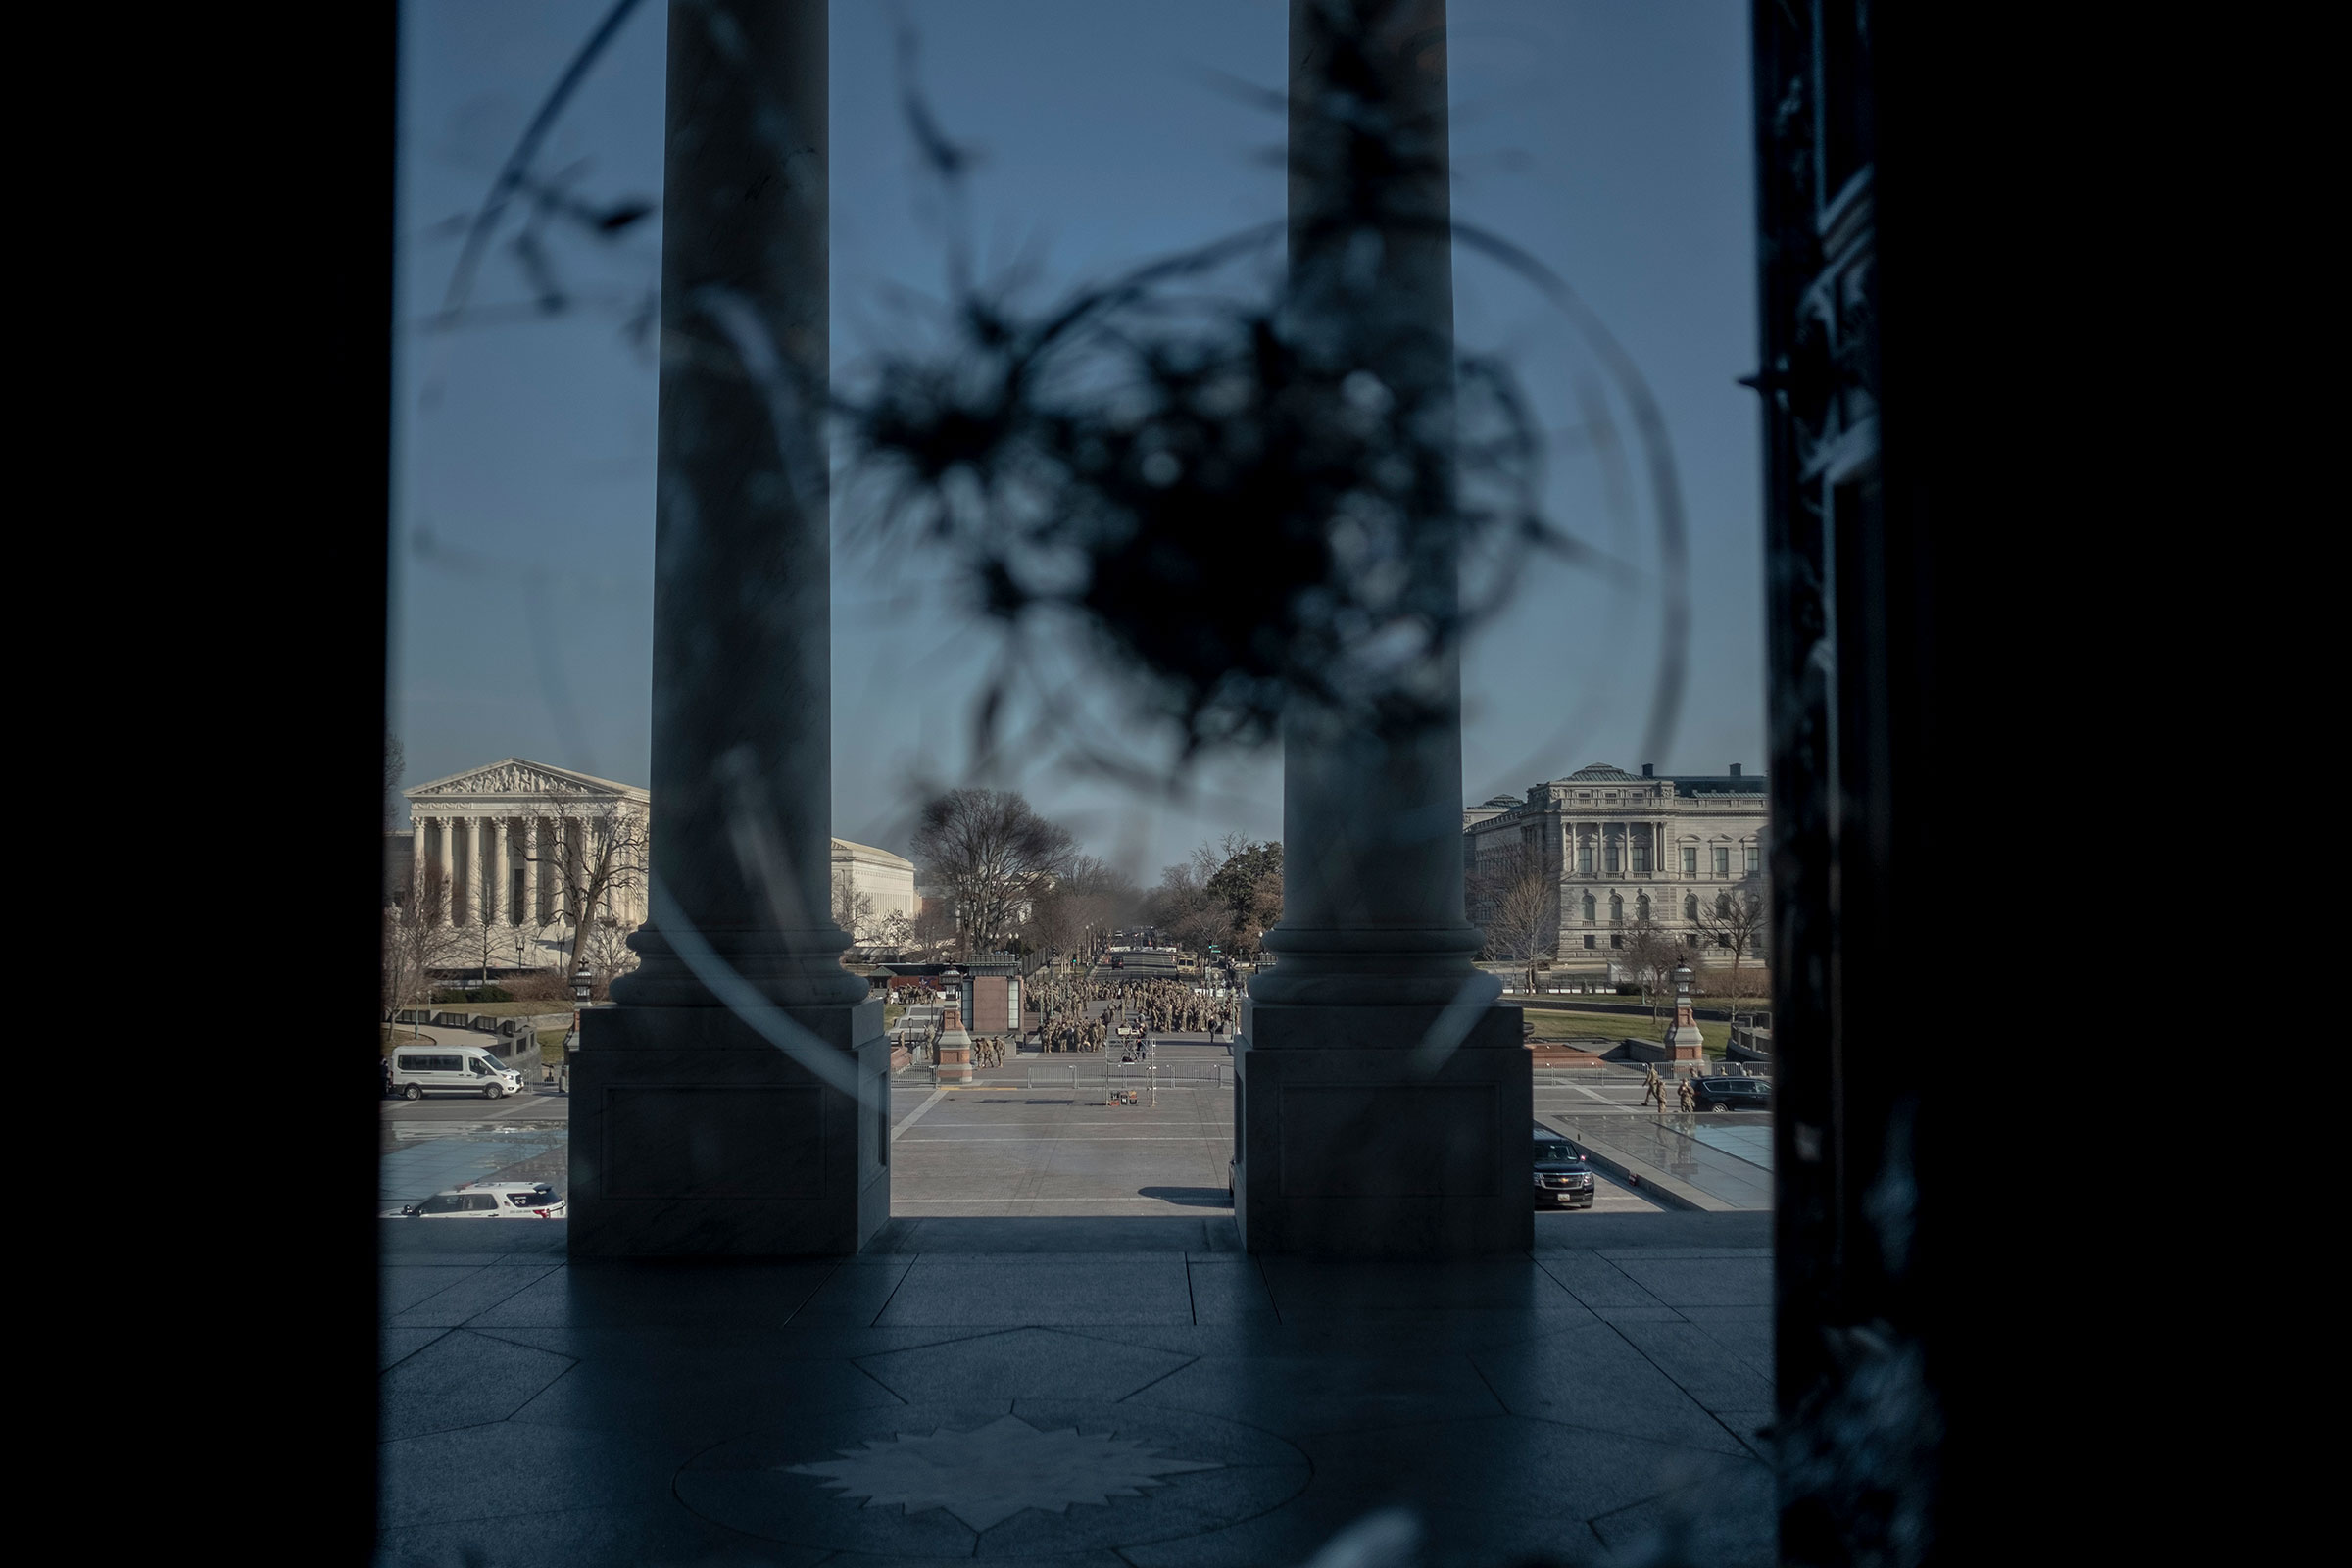 The East Front of the Capitol, which was damaged during the insurrection the week prior, in Washington, on Jan.13, 2020. (Gabriella Demczuk for TIME)